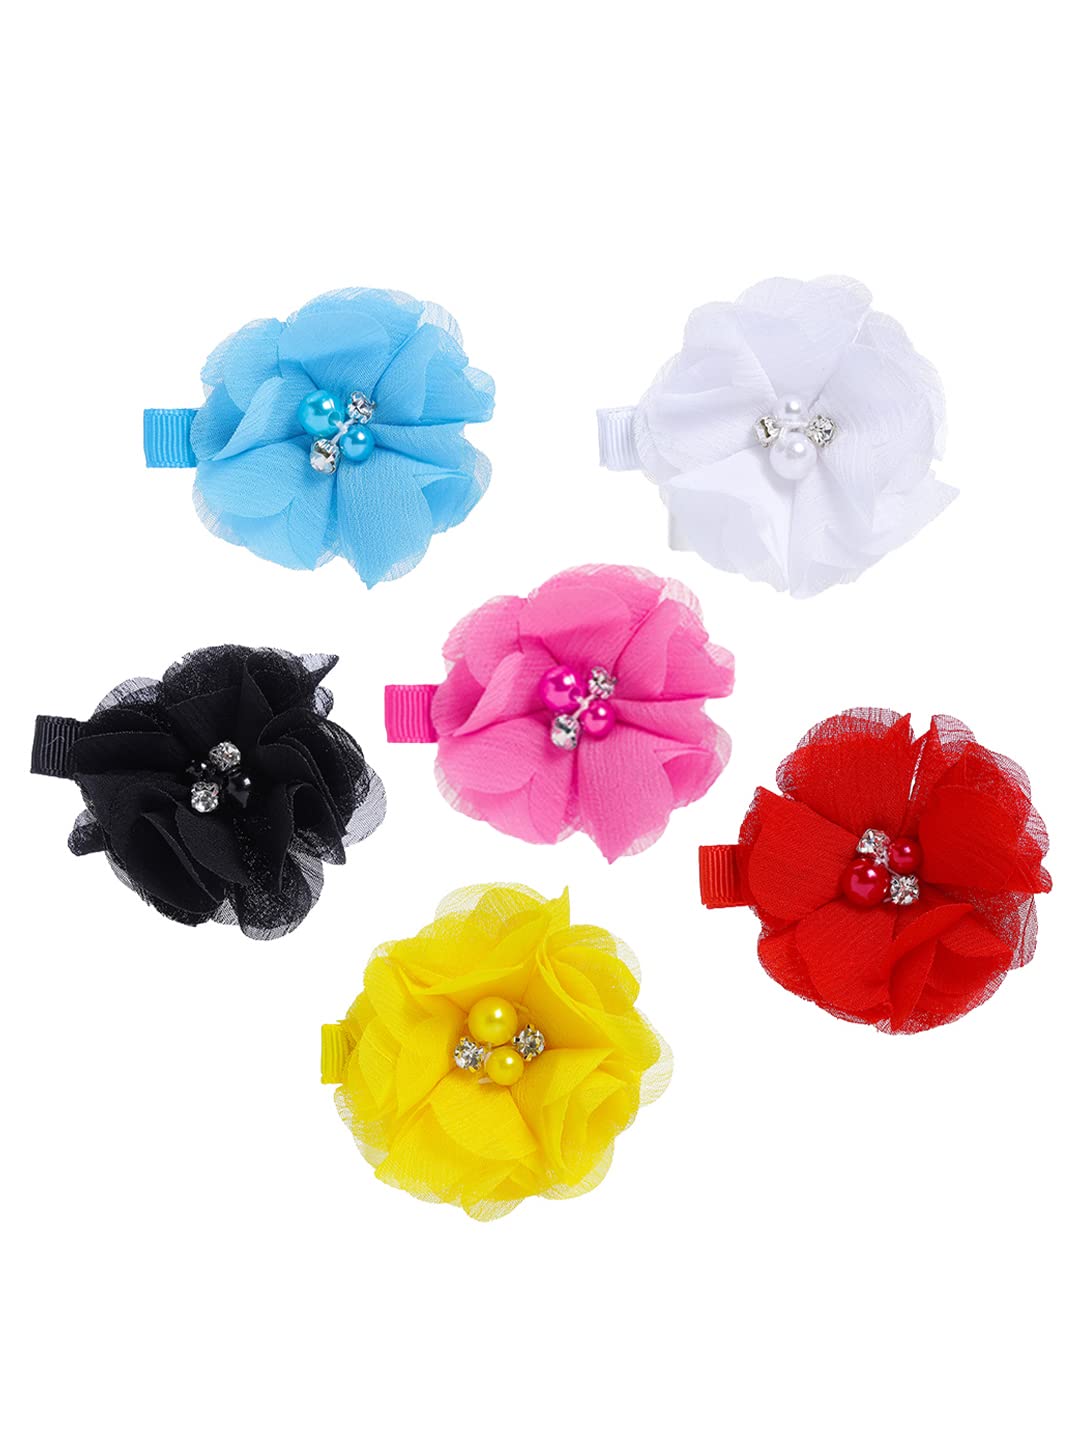 Melbees by Yellow Chimes Combo of 6 Floral Big Hair Clips Hair Accessories for Baby Infant (Pack of 6), Multi-Color, Medium